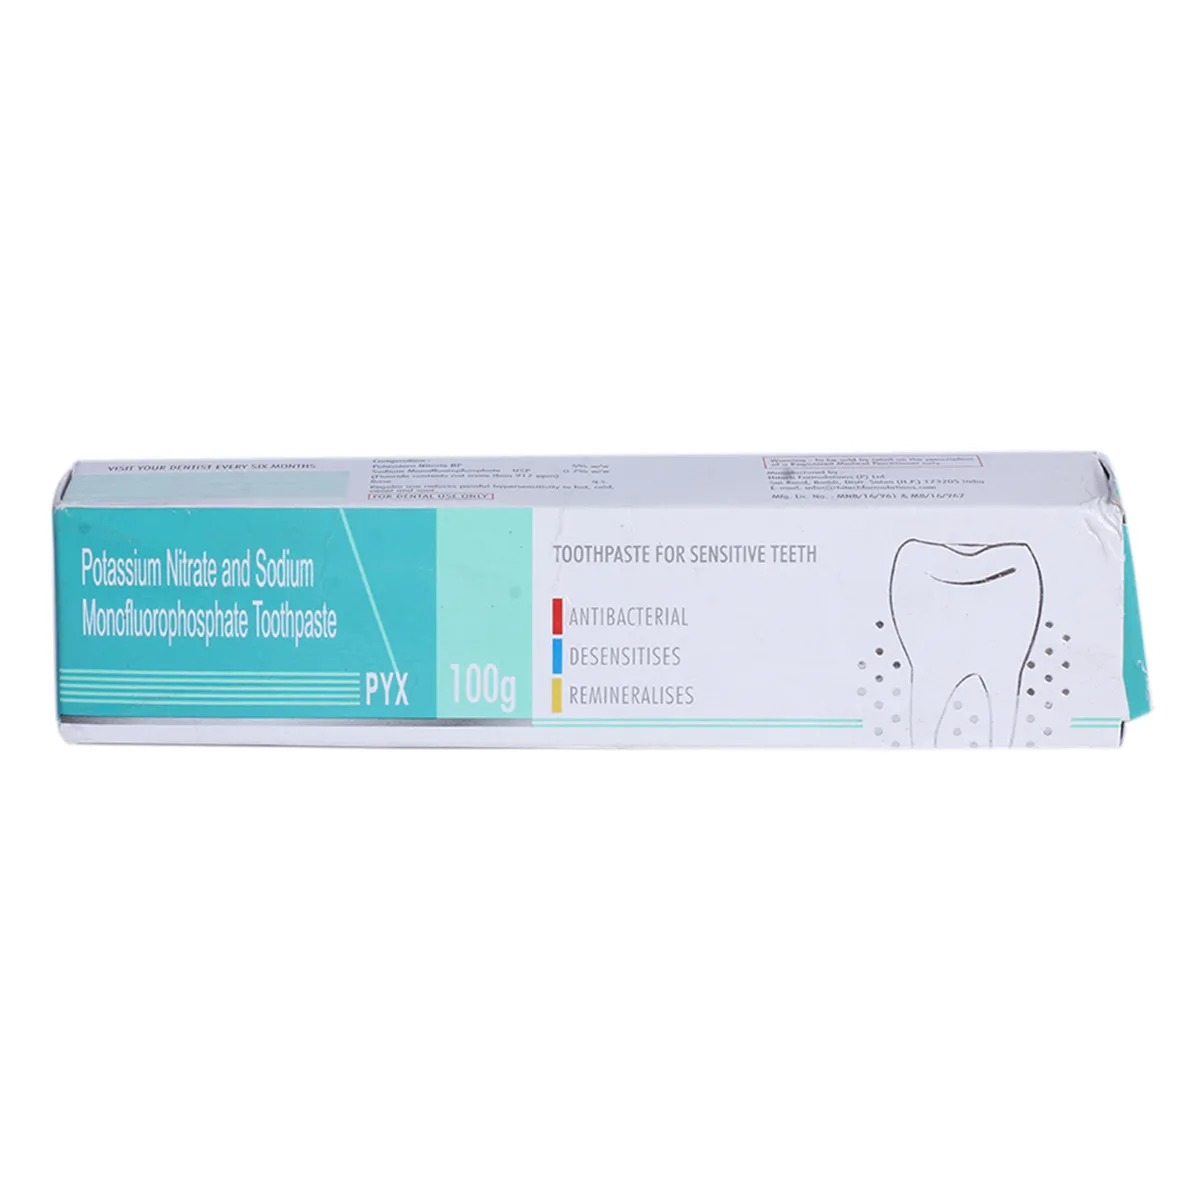 PYX Toothpaste with Fluoride | For Sensitive Teeth